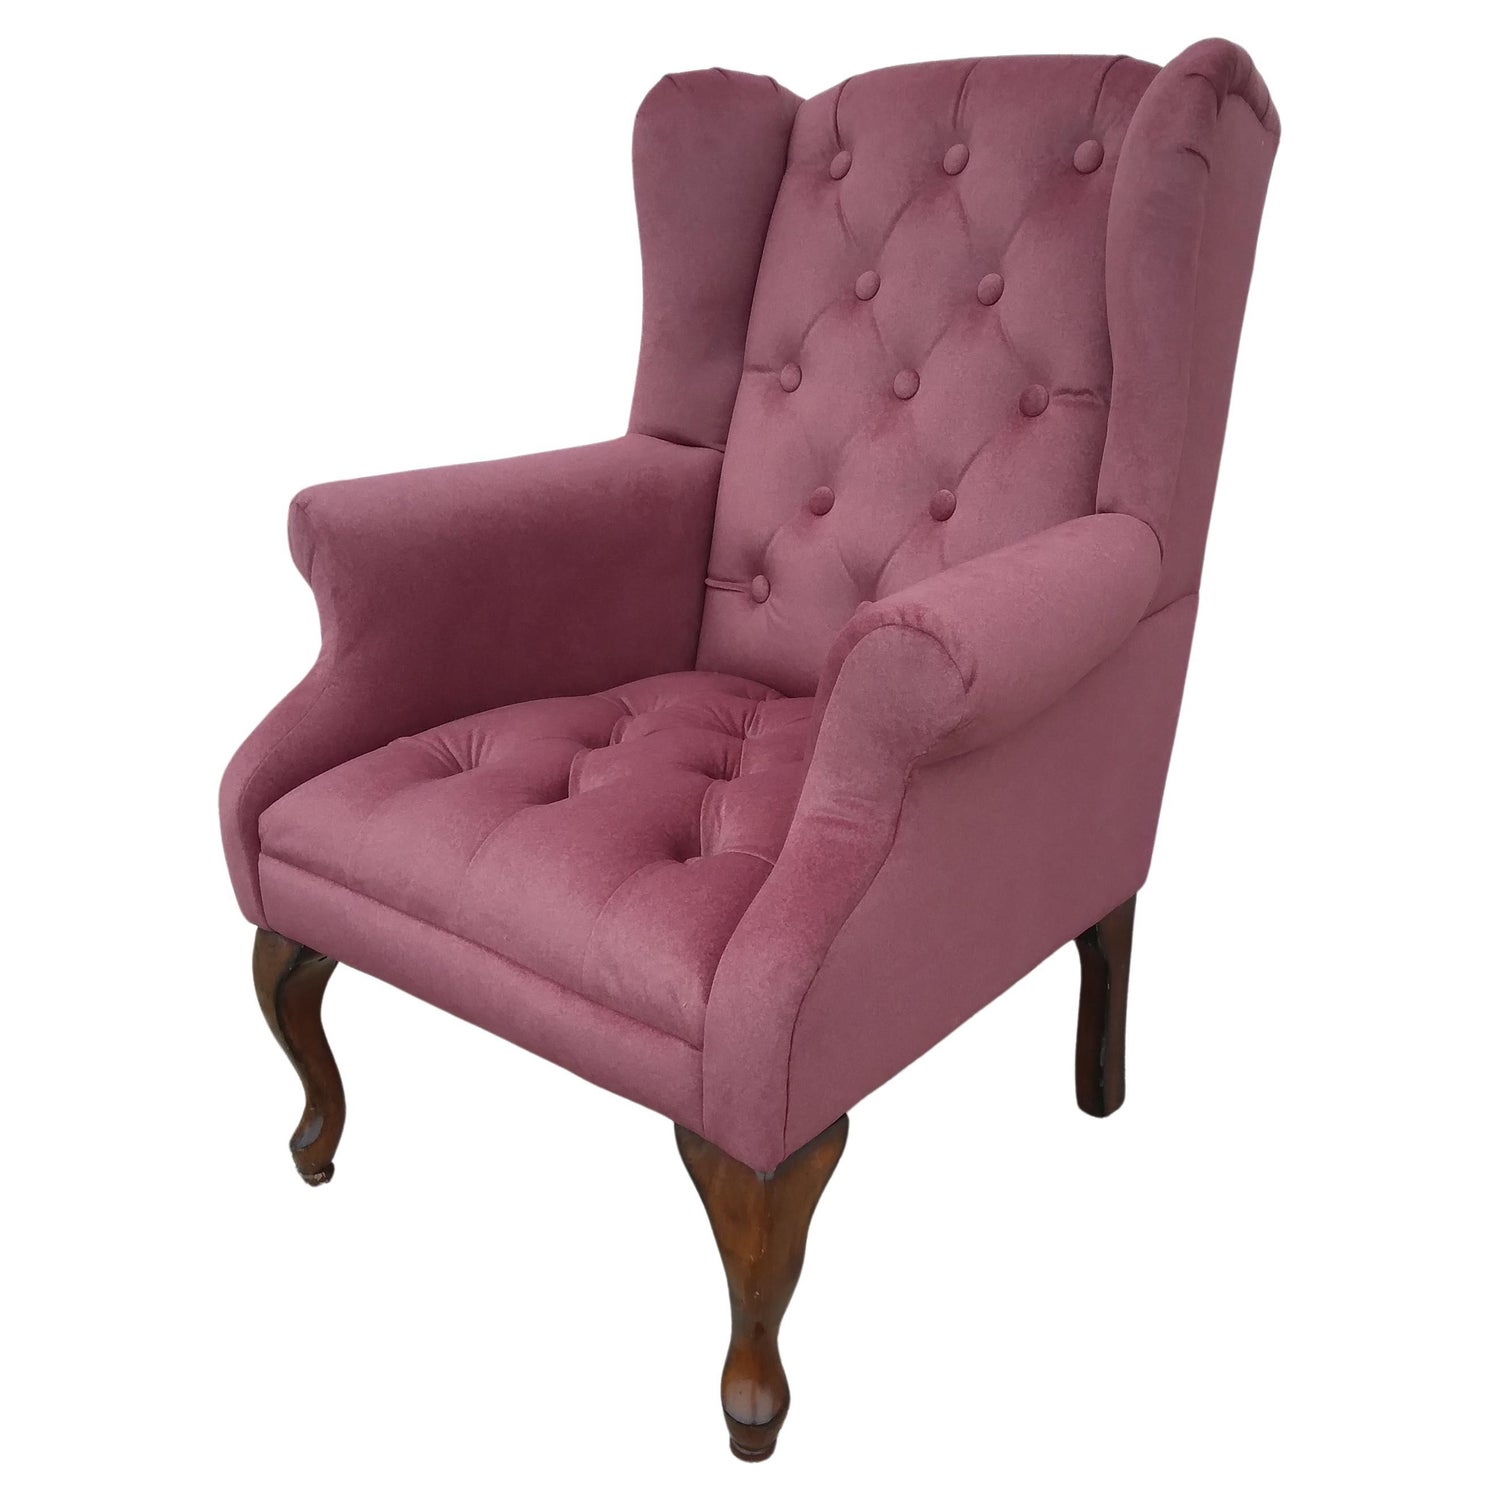 Queen Anne Wingback Chairs - 31 For Sale at 1stDibs | queen anne chairs,  queen anne wing chair, queen anne wingback chair for sale